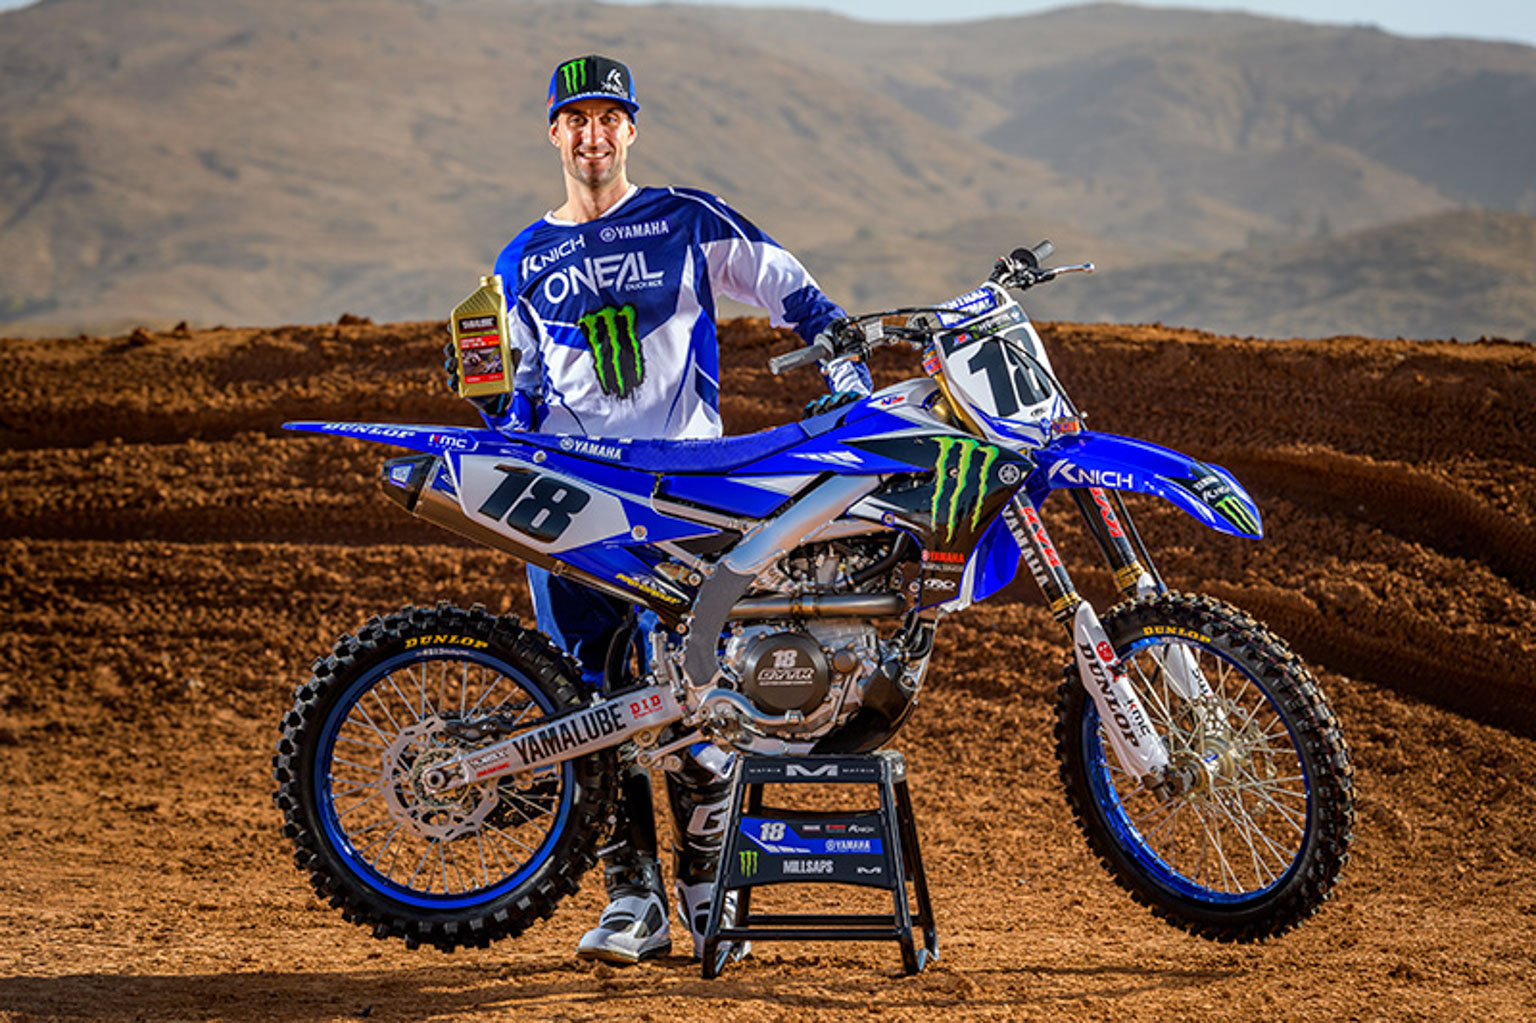 Millsaps is hoping for a trouble-free 2018